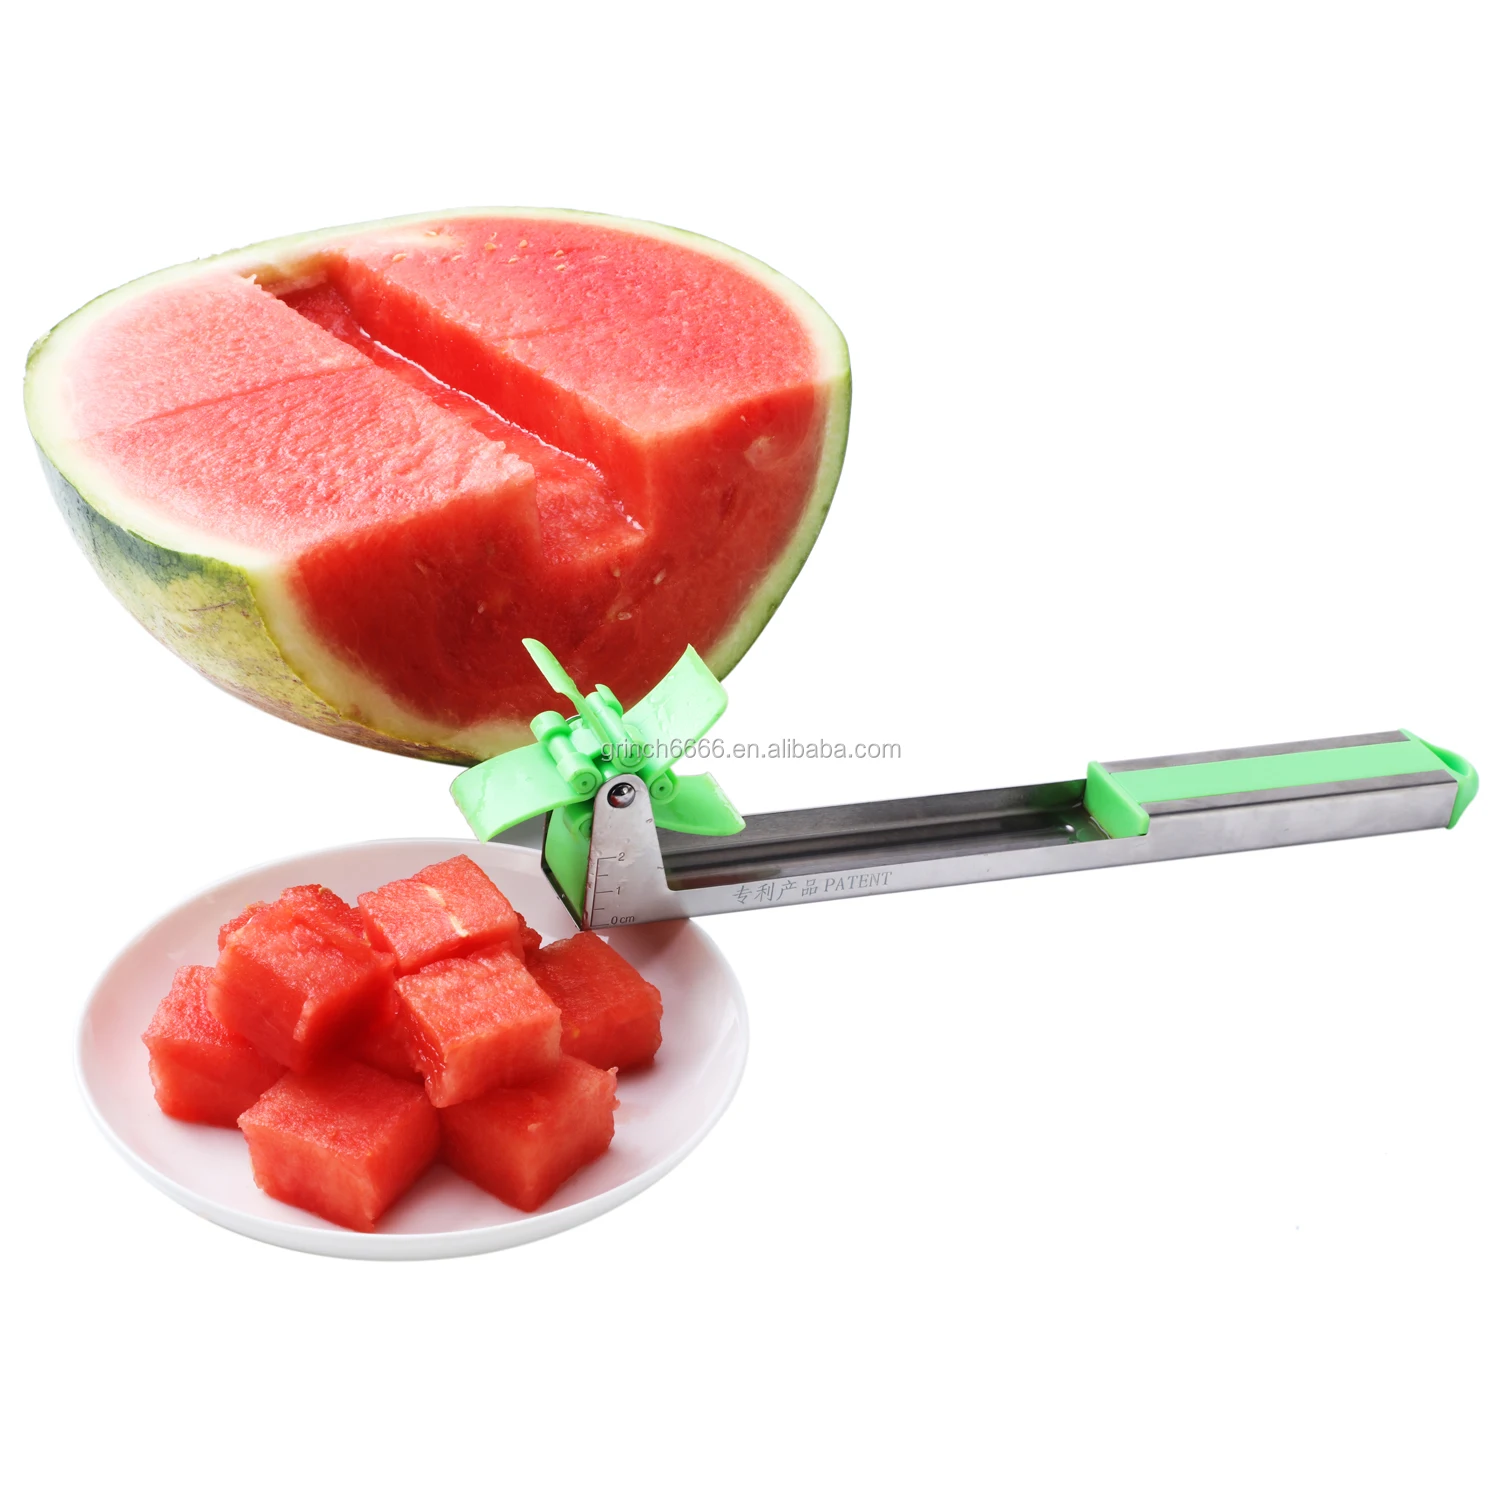 Watermelon Windmill Cutter Slicer Auto Stainless Steel Melon Cuber Knife  Fun Fruit Vegetable Salad Cutter Tool Kitchen Gadget - Buy Watermelon Slicer ,Watermelon Windmill Cutter,Watermelon Windmill Slicer Product on  Alibaba.com